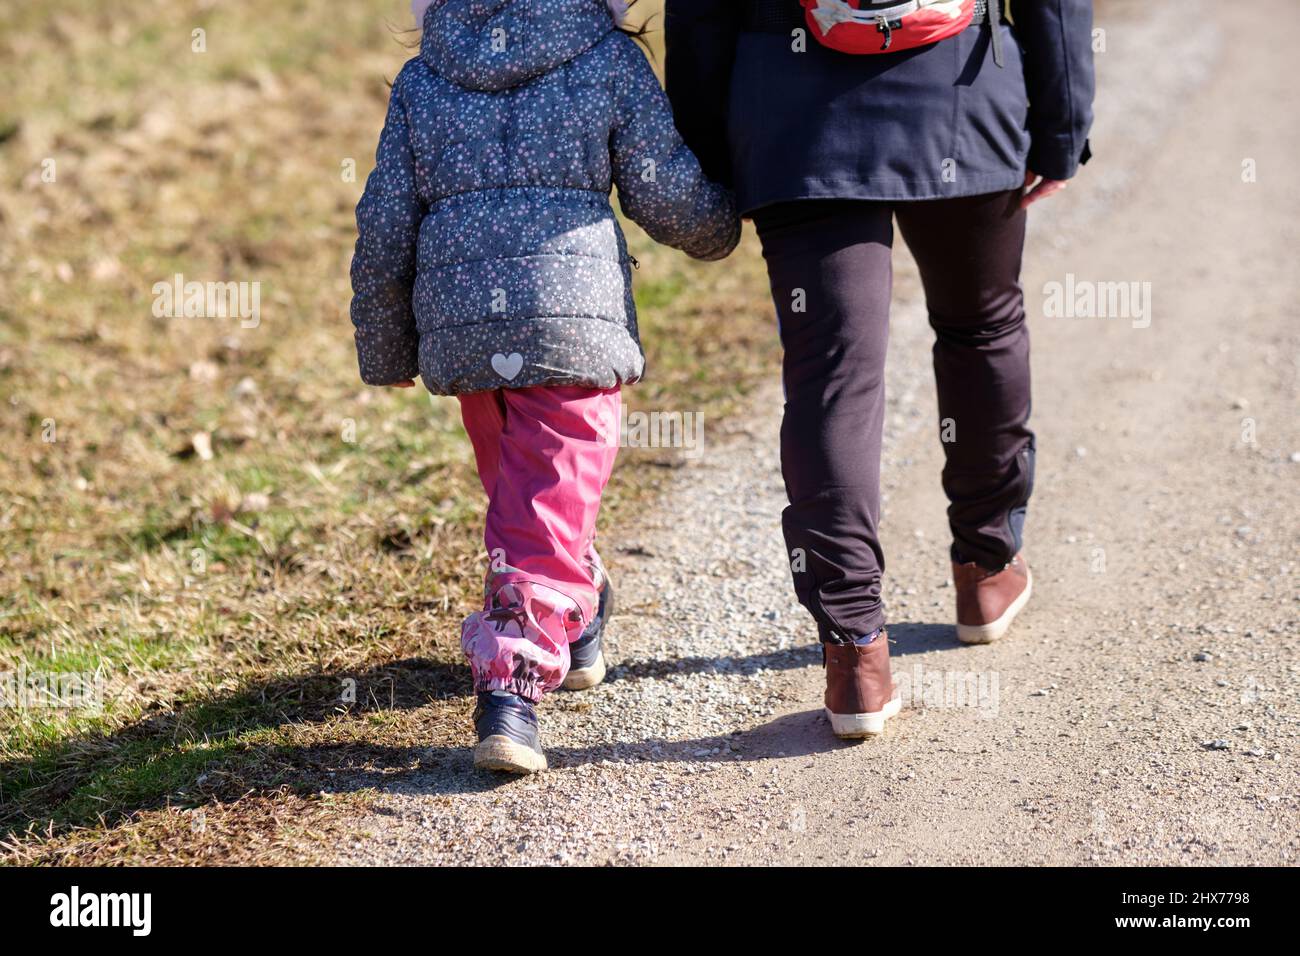 Rear view of low section of a 6 year old child girl in winter clothing walking hand in hand with her mother on a sunny gravel road in Germany in Febru Stock Photo